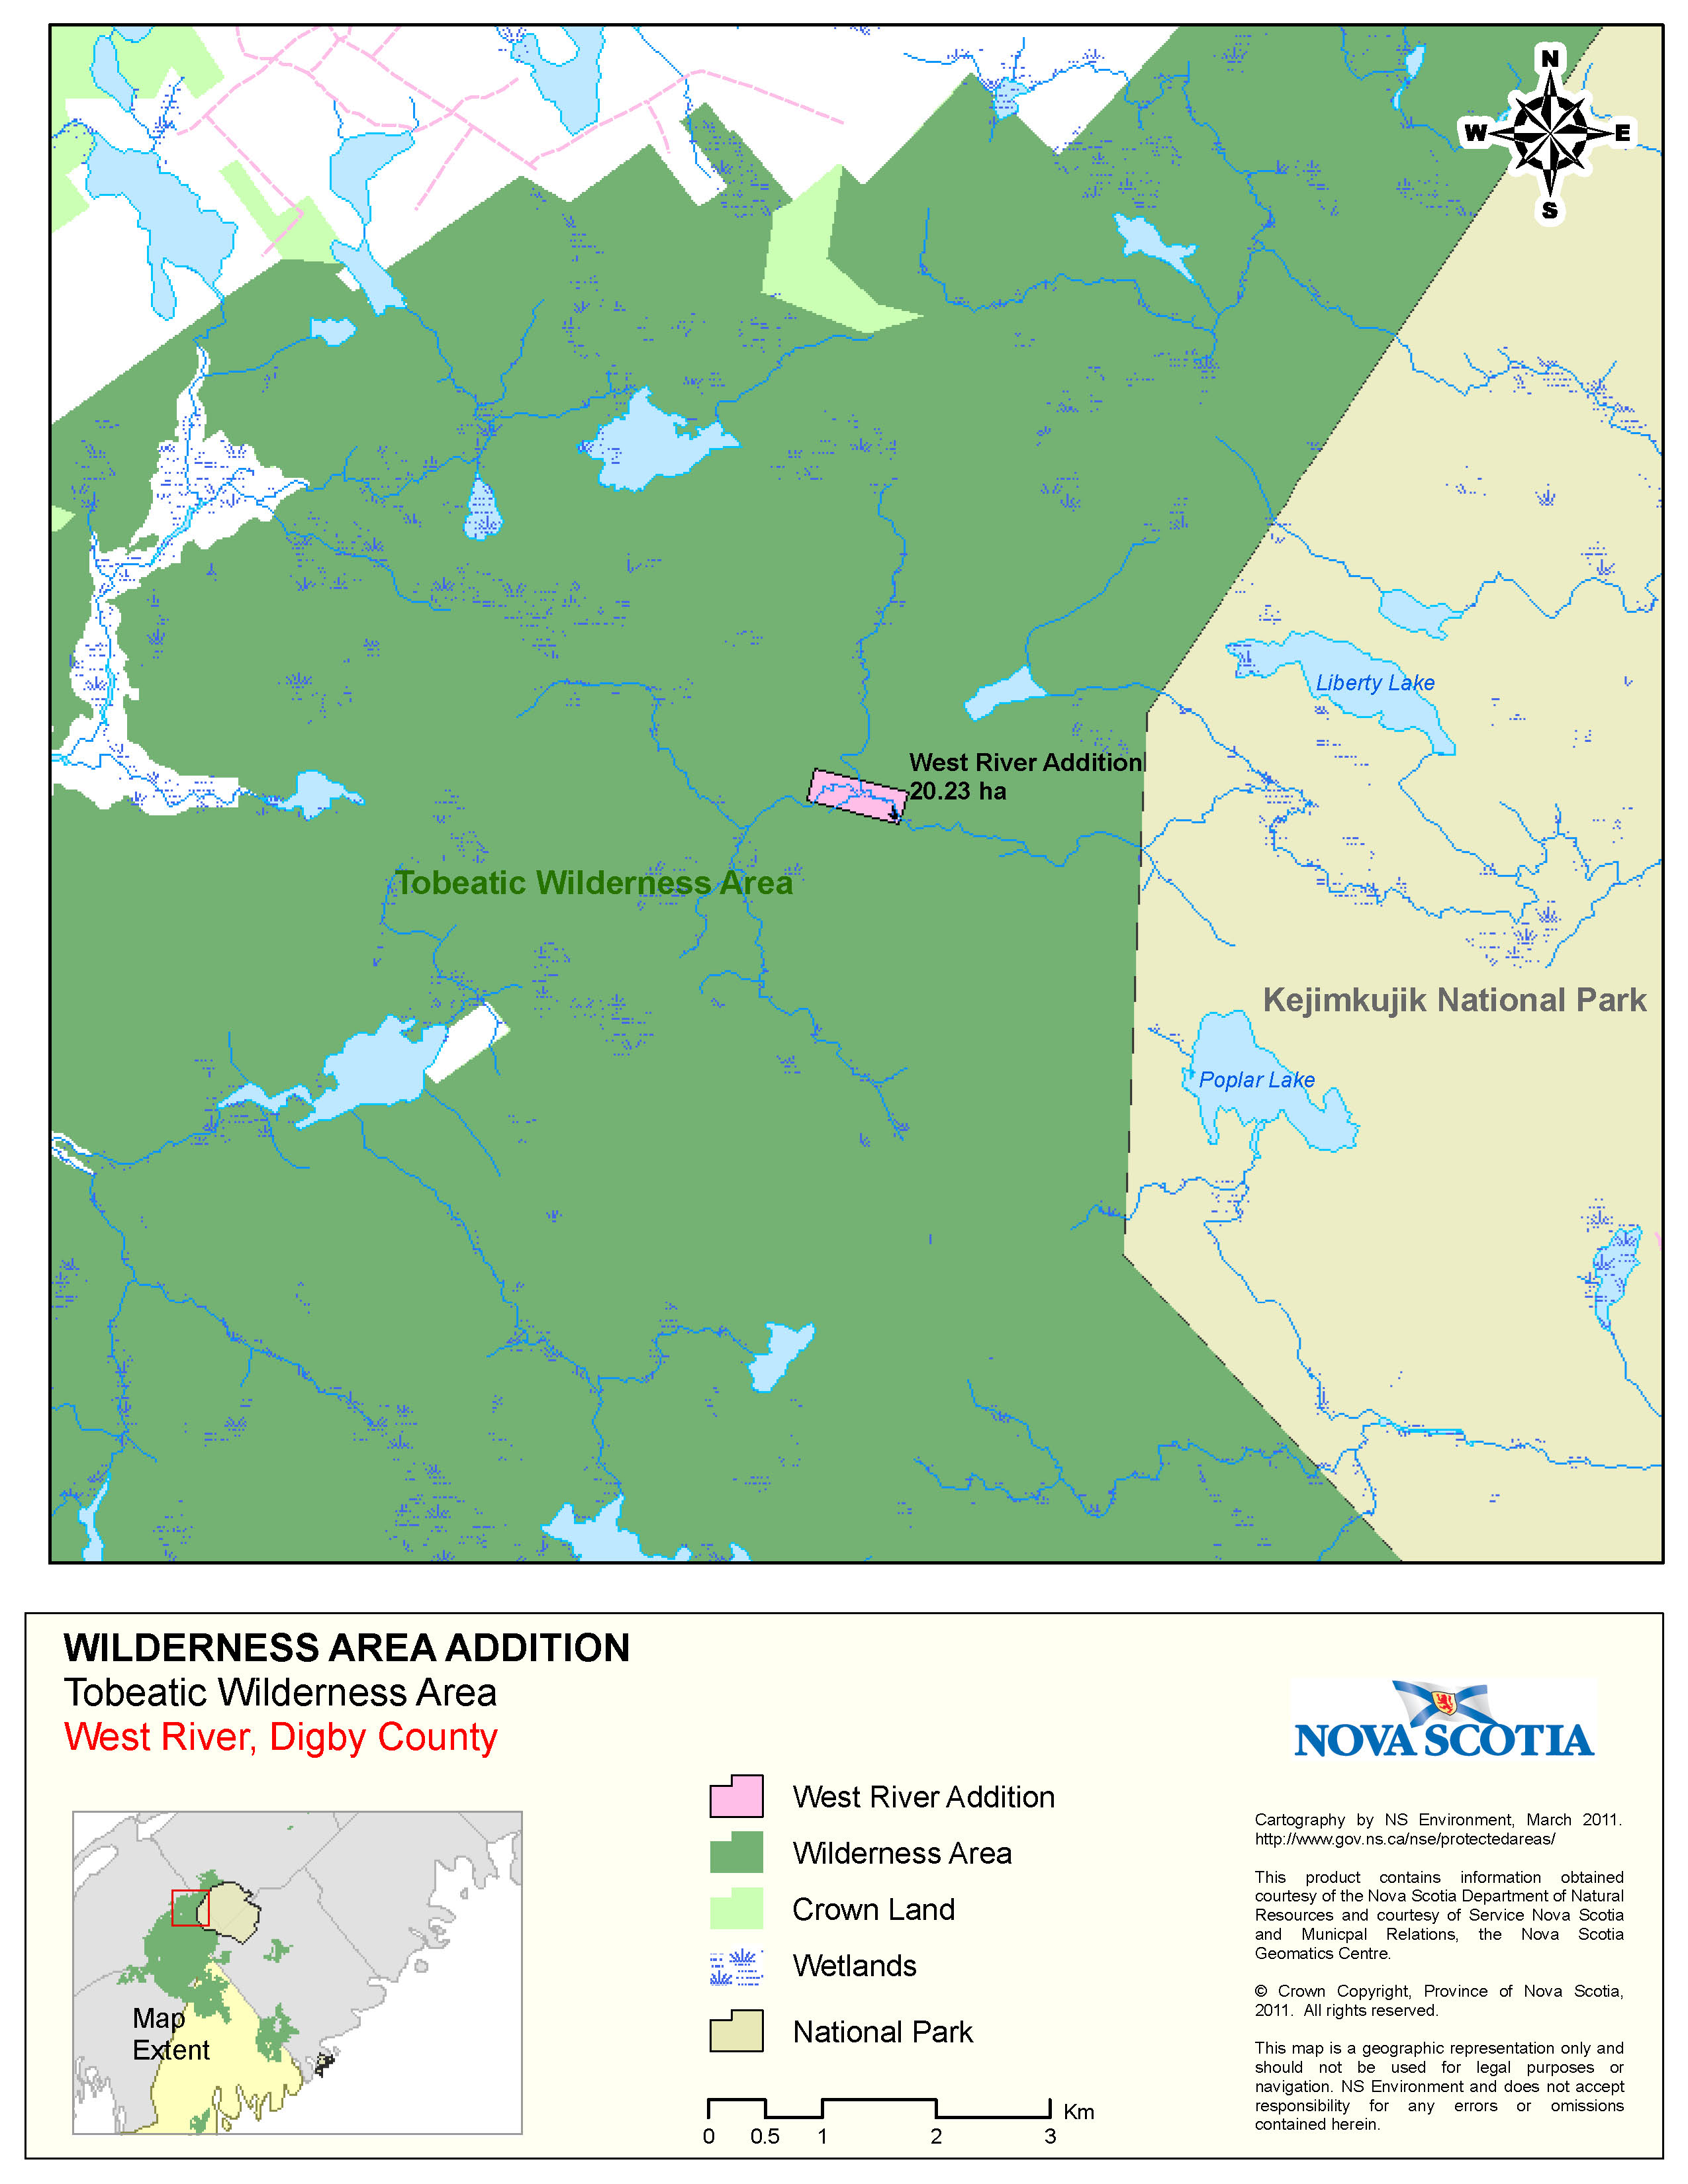 Approximate Boundaries of Crown Land at West River, Digby County